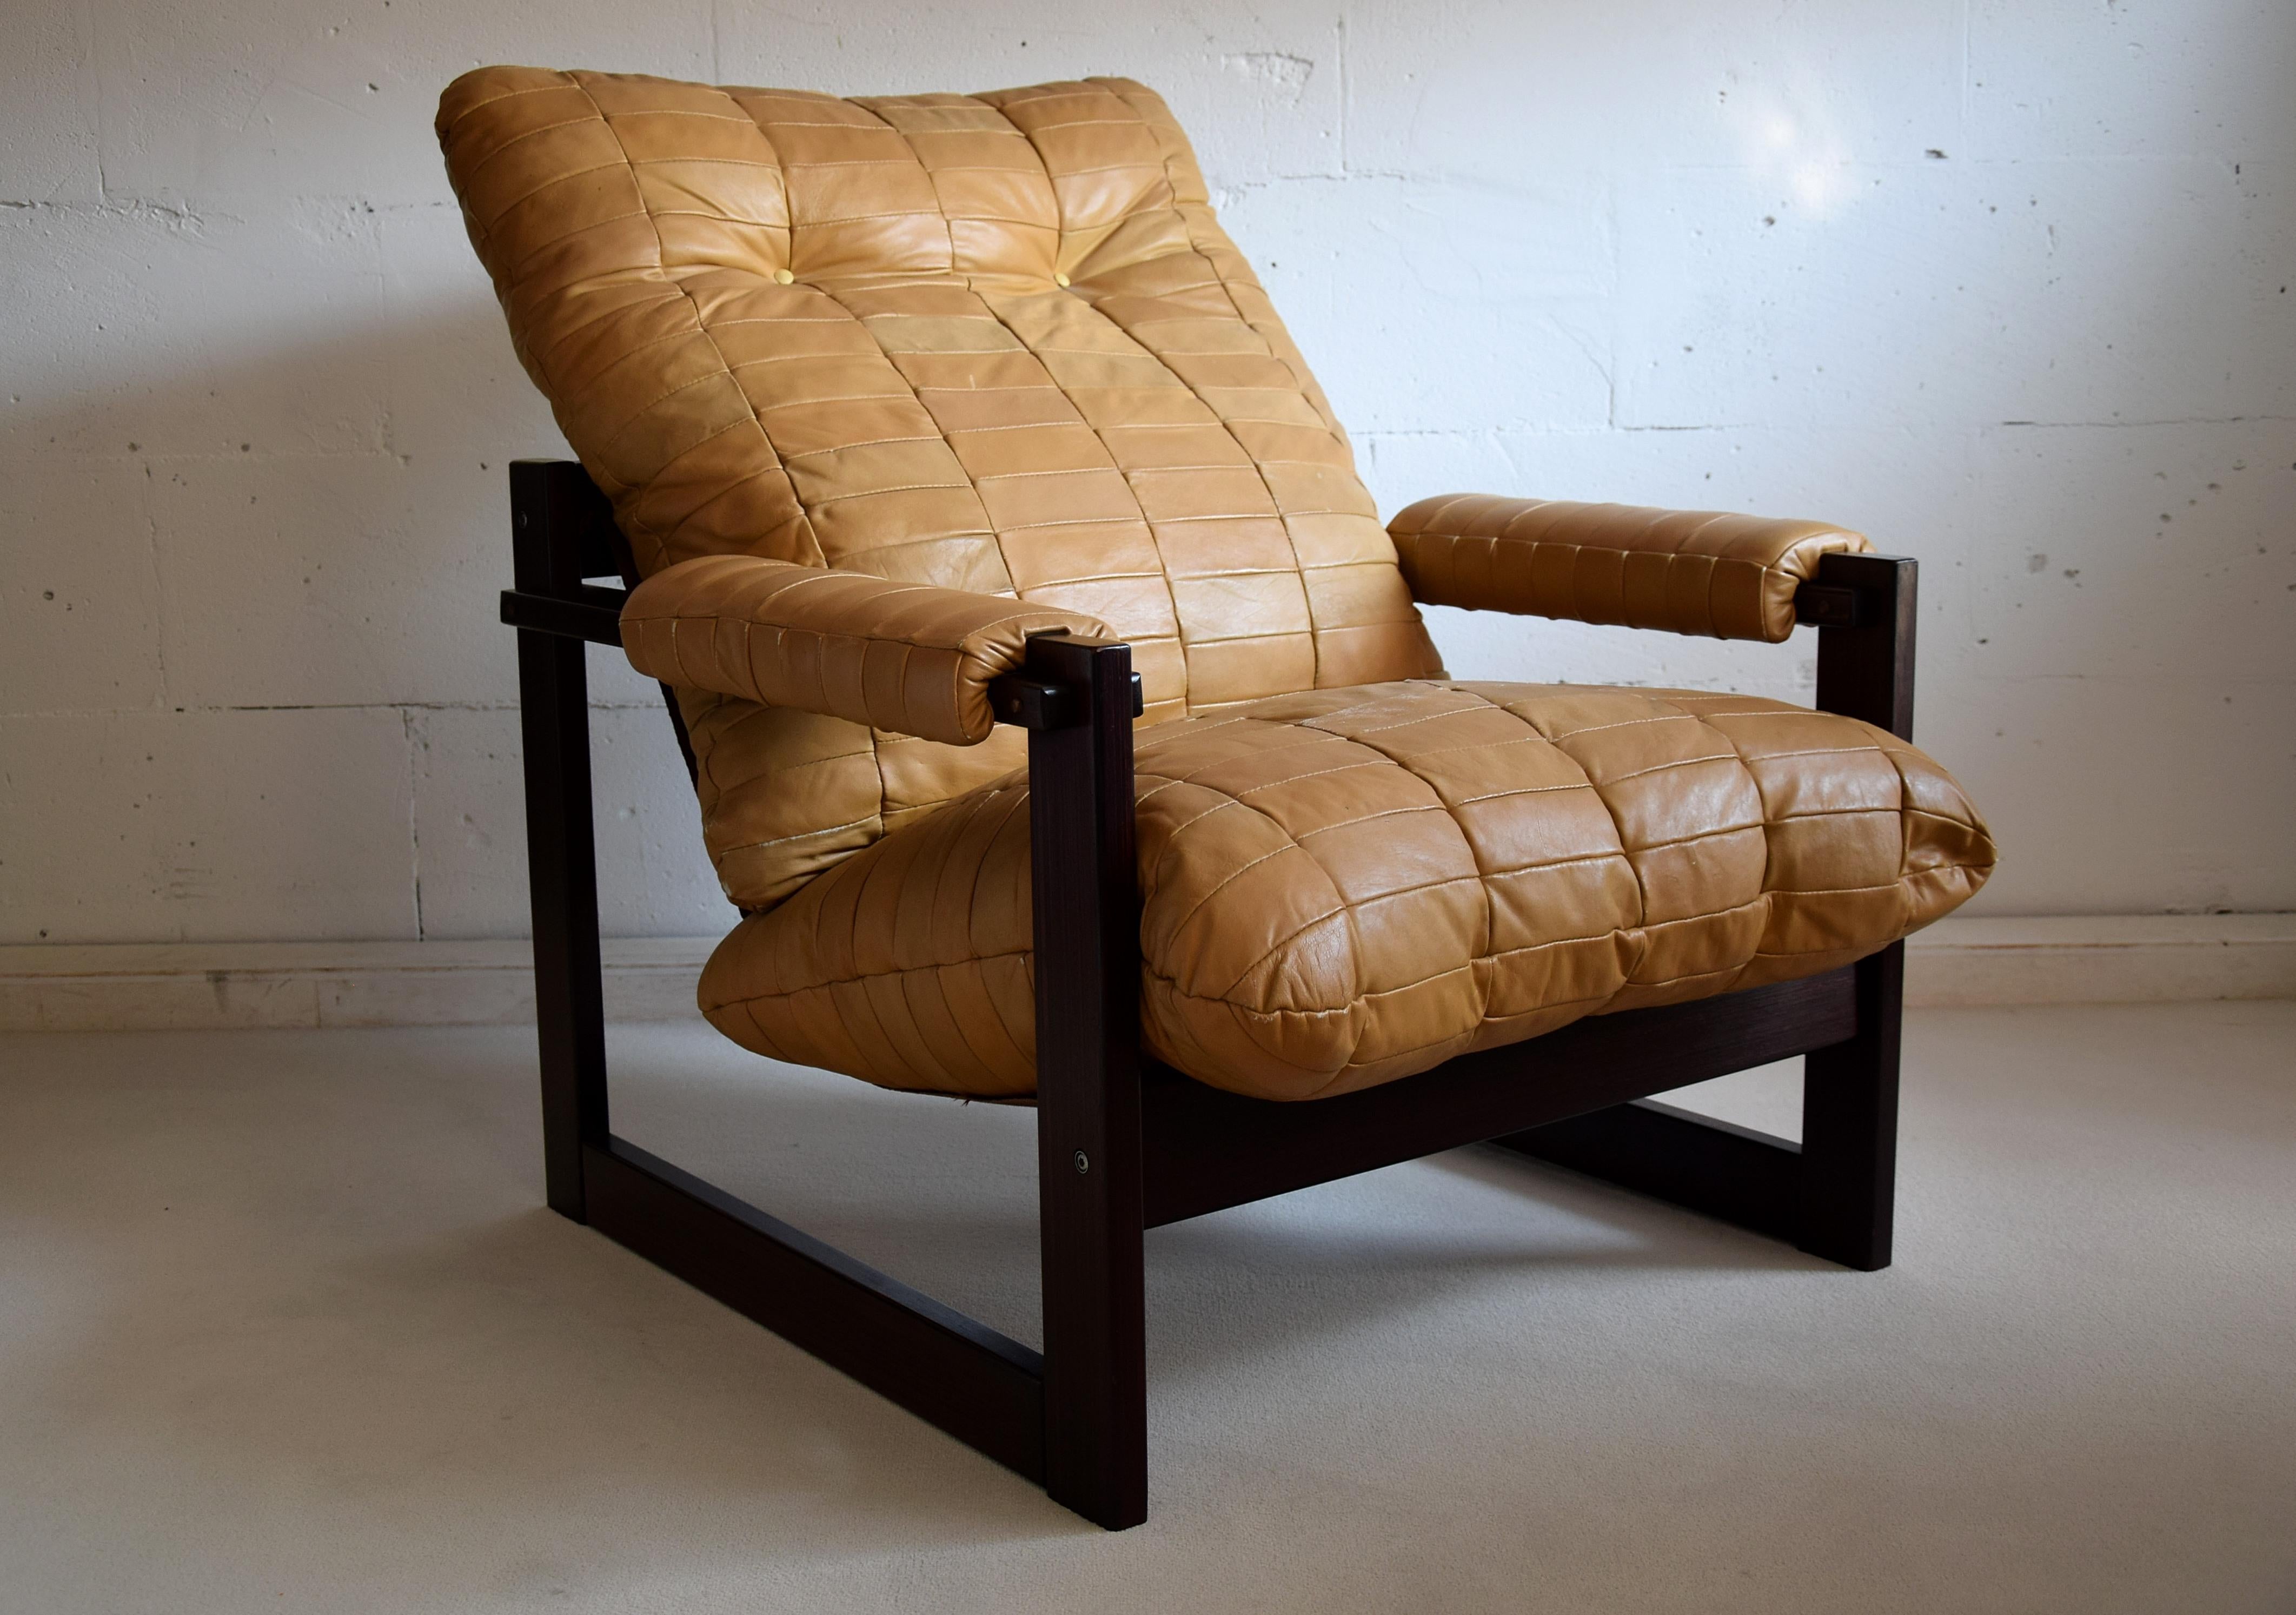 Stylish Mid-Century Modern lounge chair designed and produced by Percival Lafer In Sào Paulo Brazil. The Brazilian Jatoba structure is in good condition and the chair still has it's original camel color leather upholstery. This chair was made on the